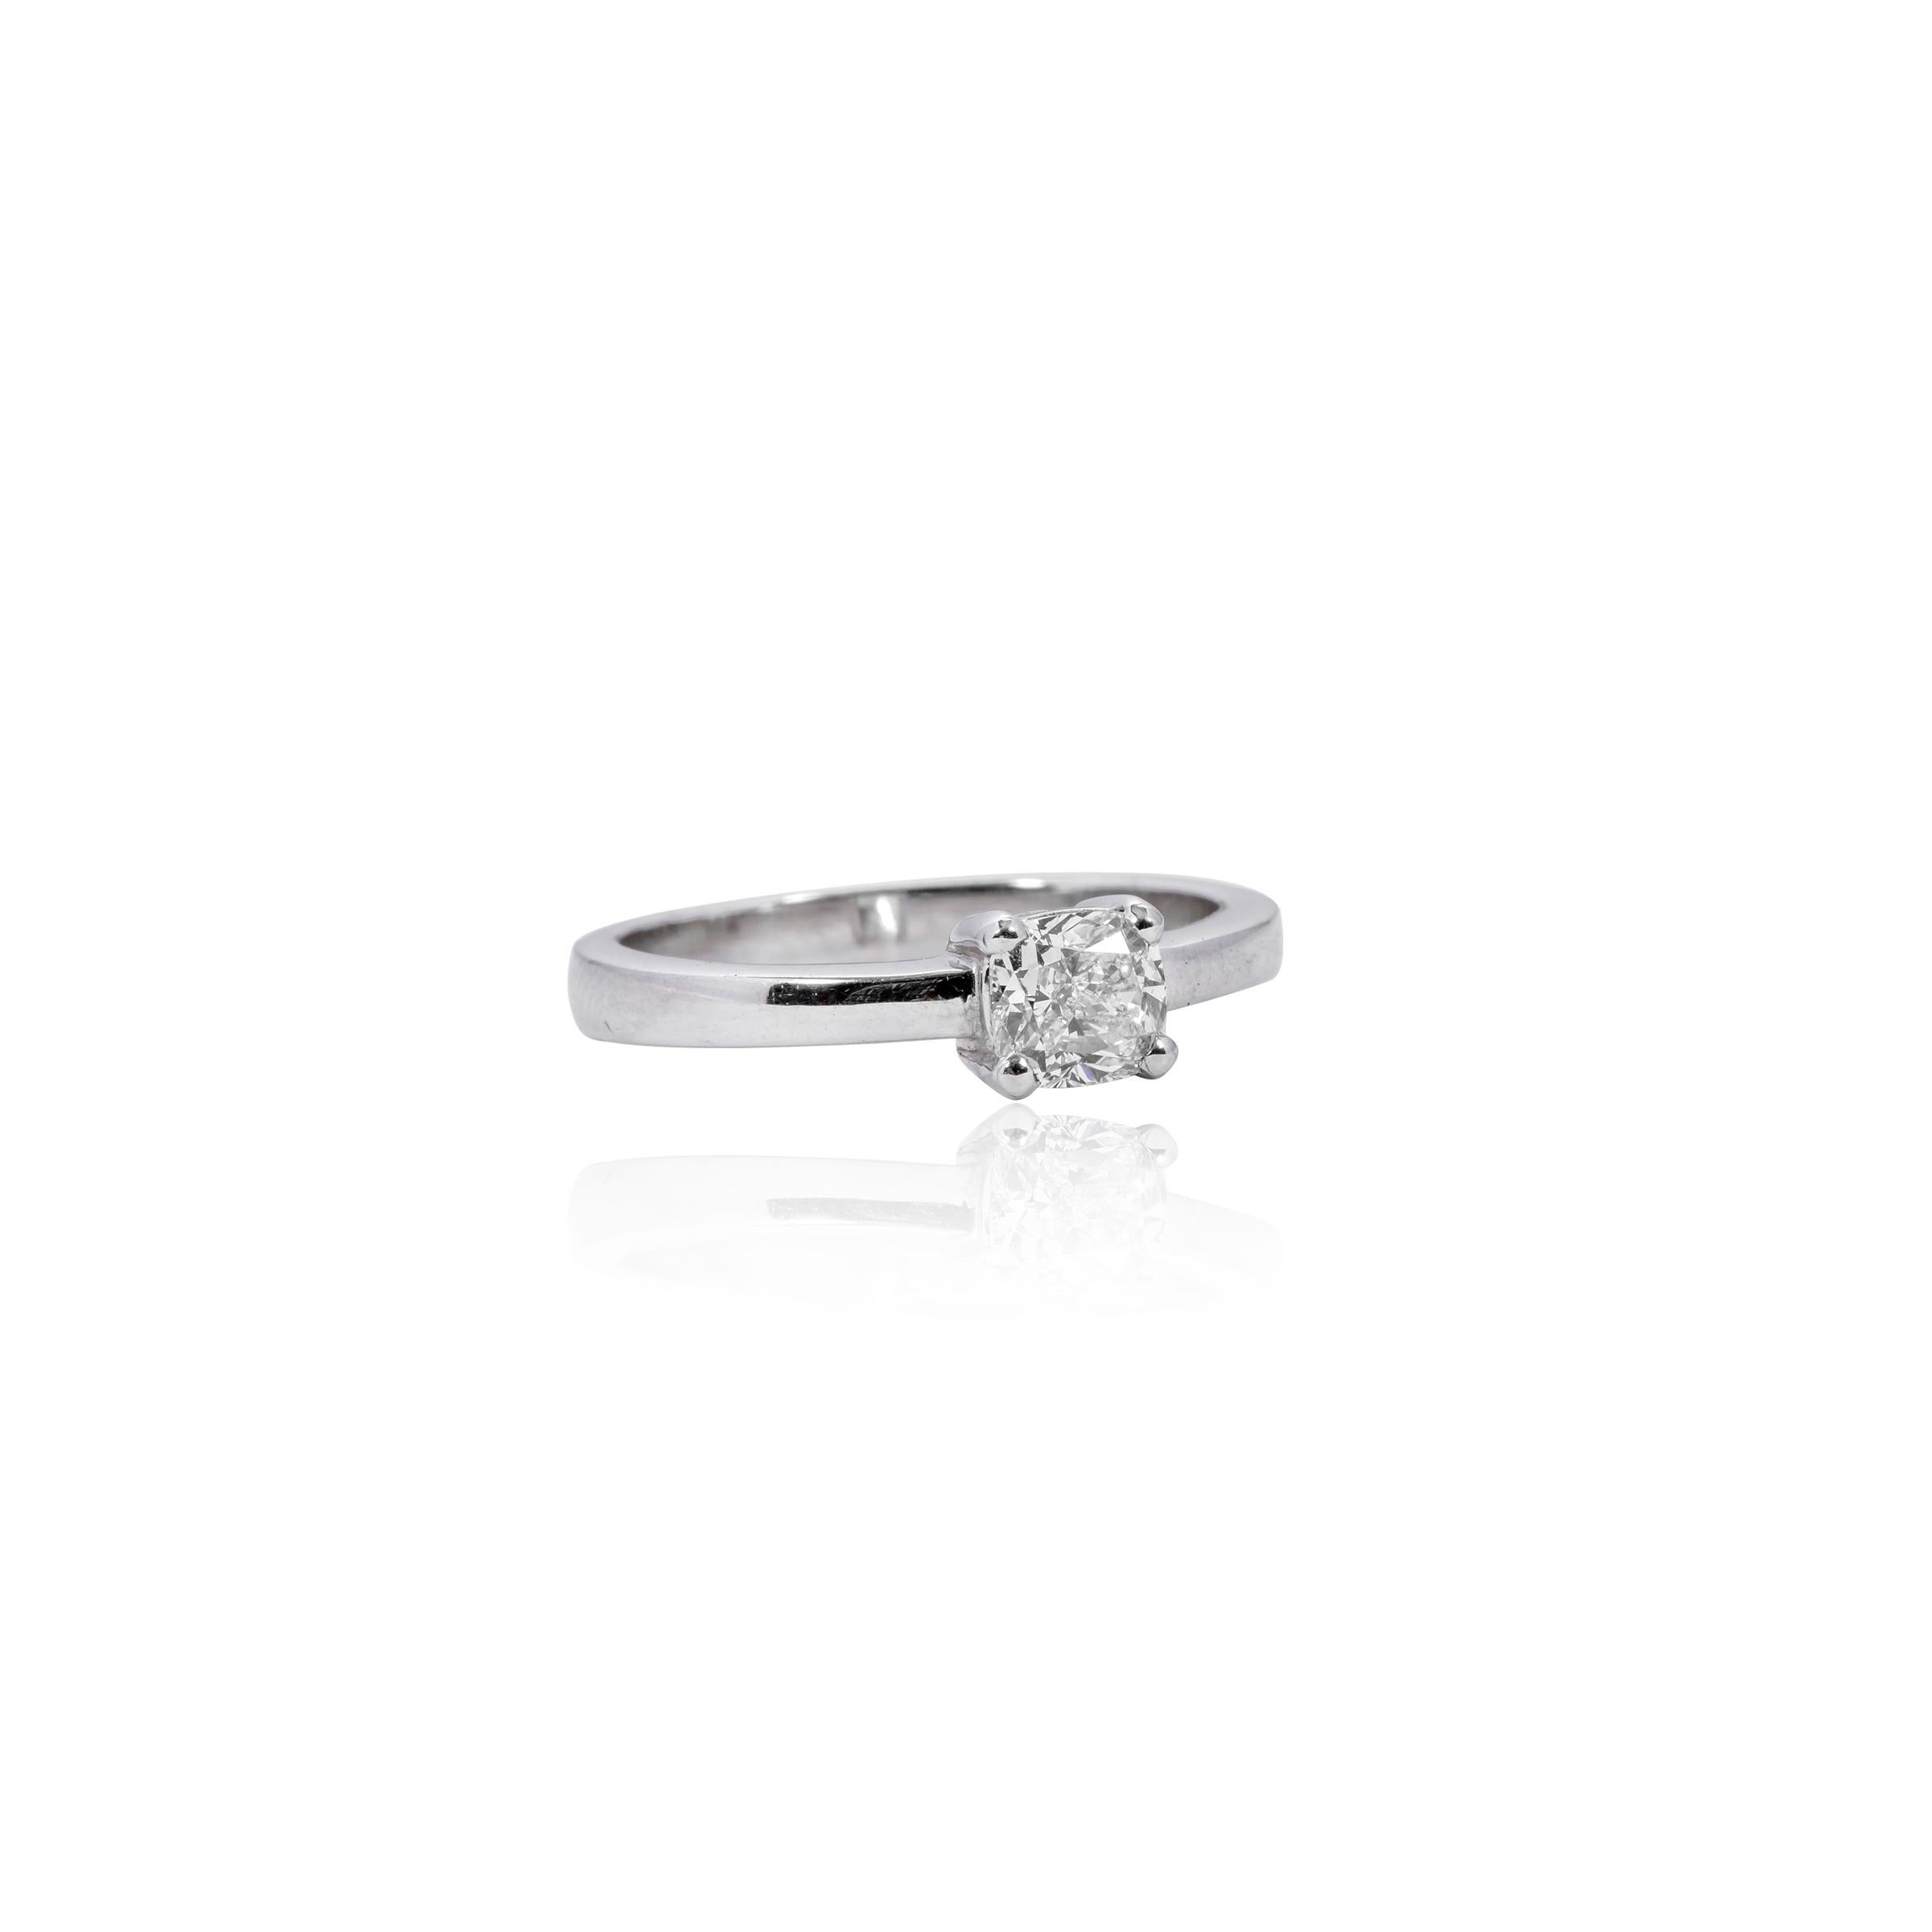 18 Karat White Gold 0.70 Carat Diamond Cushion-Cut Solitaire Engagement Ring

This quintessential solitaire fancy cushion cut diamond engagement ring is gorgeous. The ideal solitaire cushion cut diamond of 0.70 carats held in the classic four prong